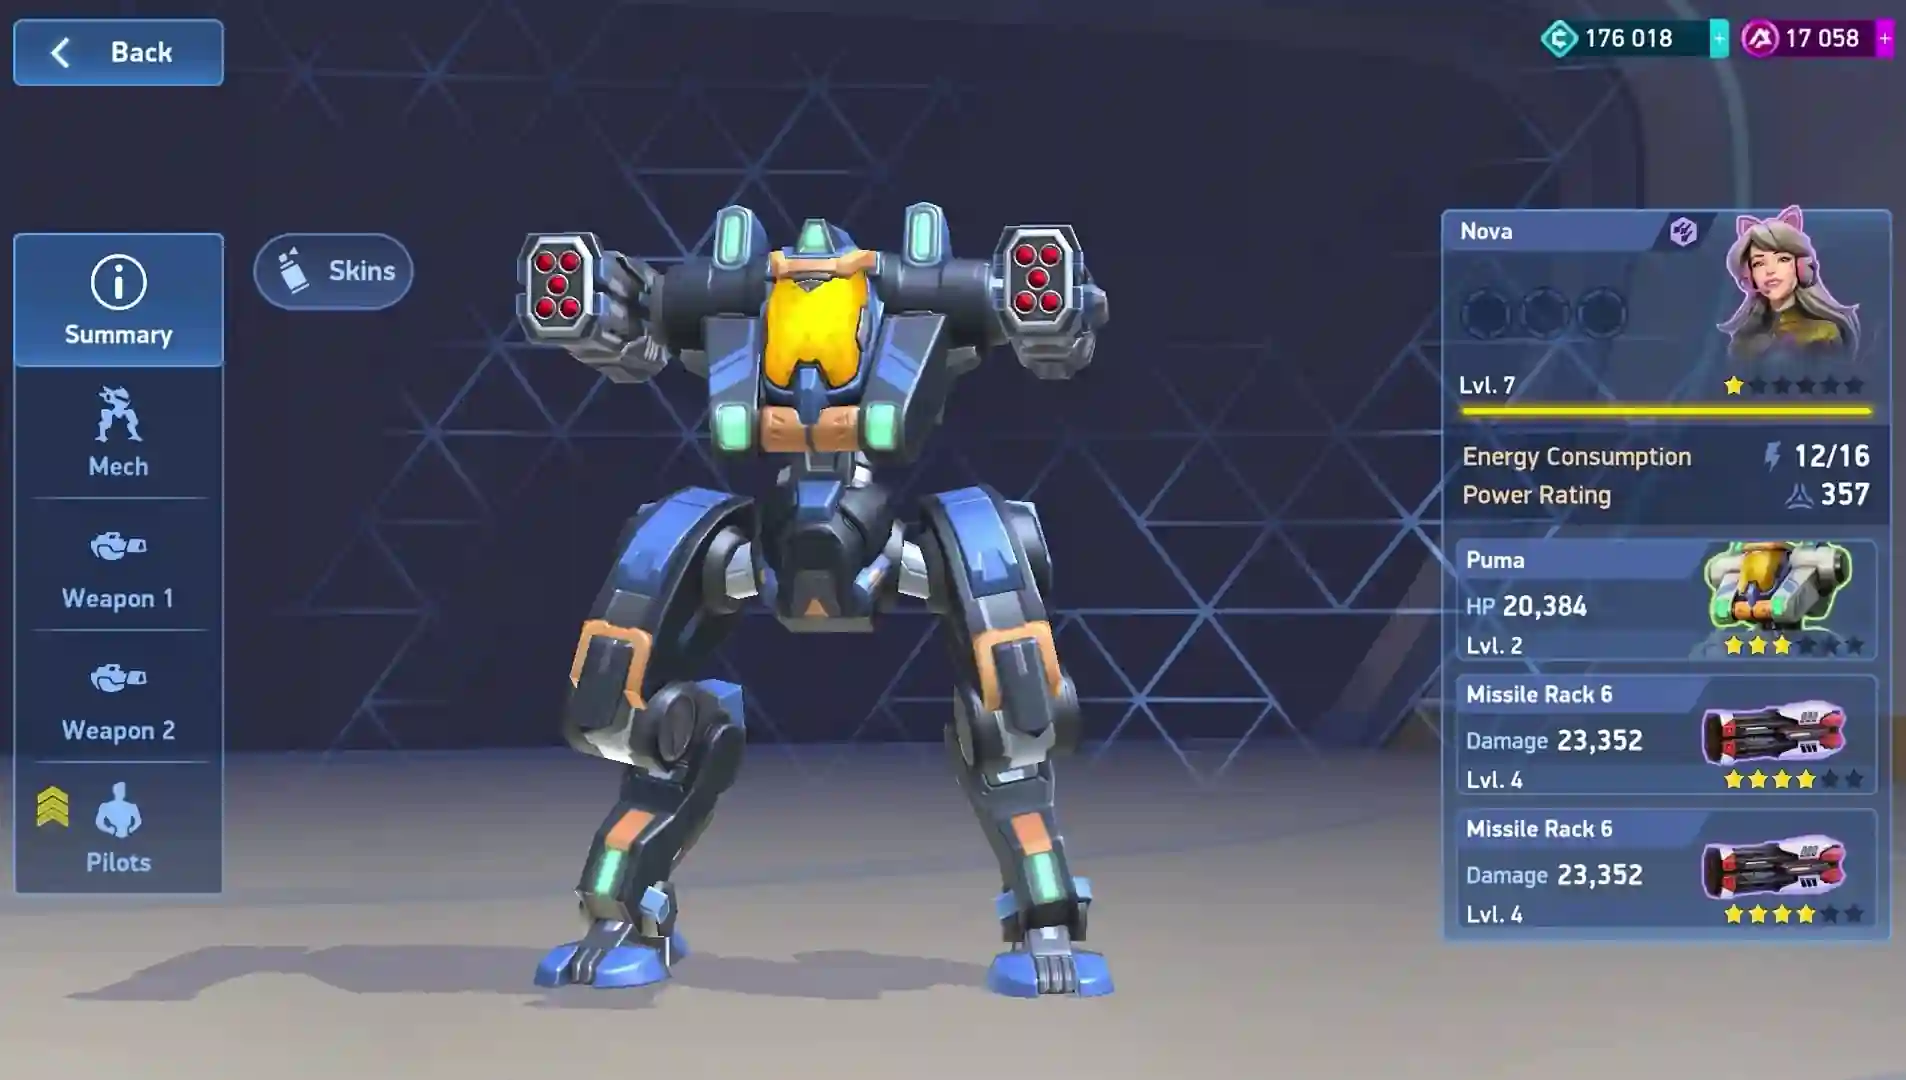 mech arena, mech arena mod menu, mech arena mod apk, hack mech arena, mech arena mod, mech arena mod apk unlimited money and gems, mech arena mod apk unlimited coins credits